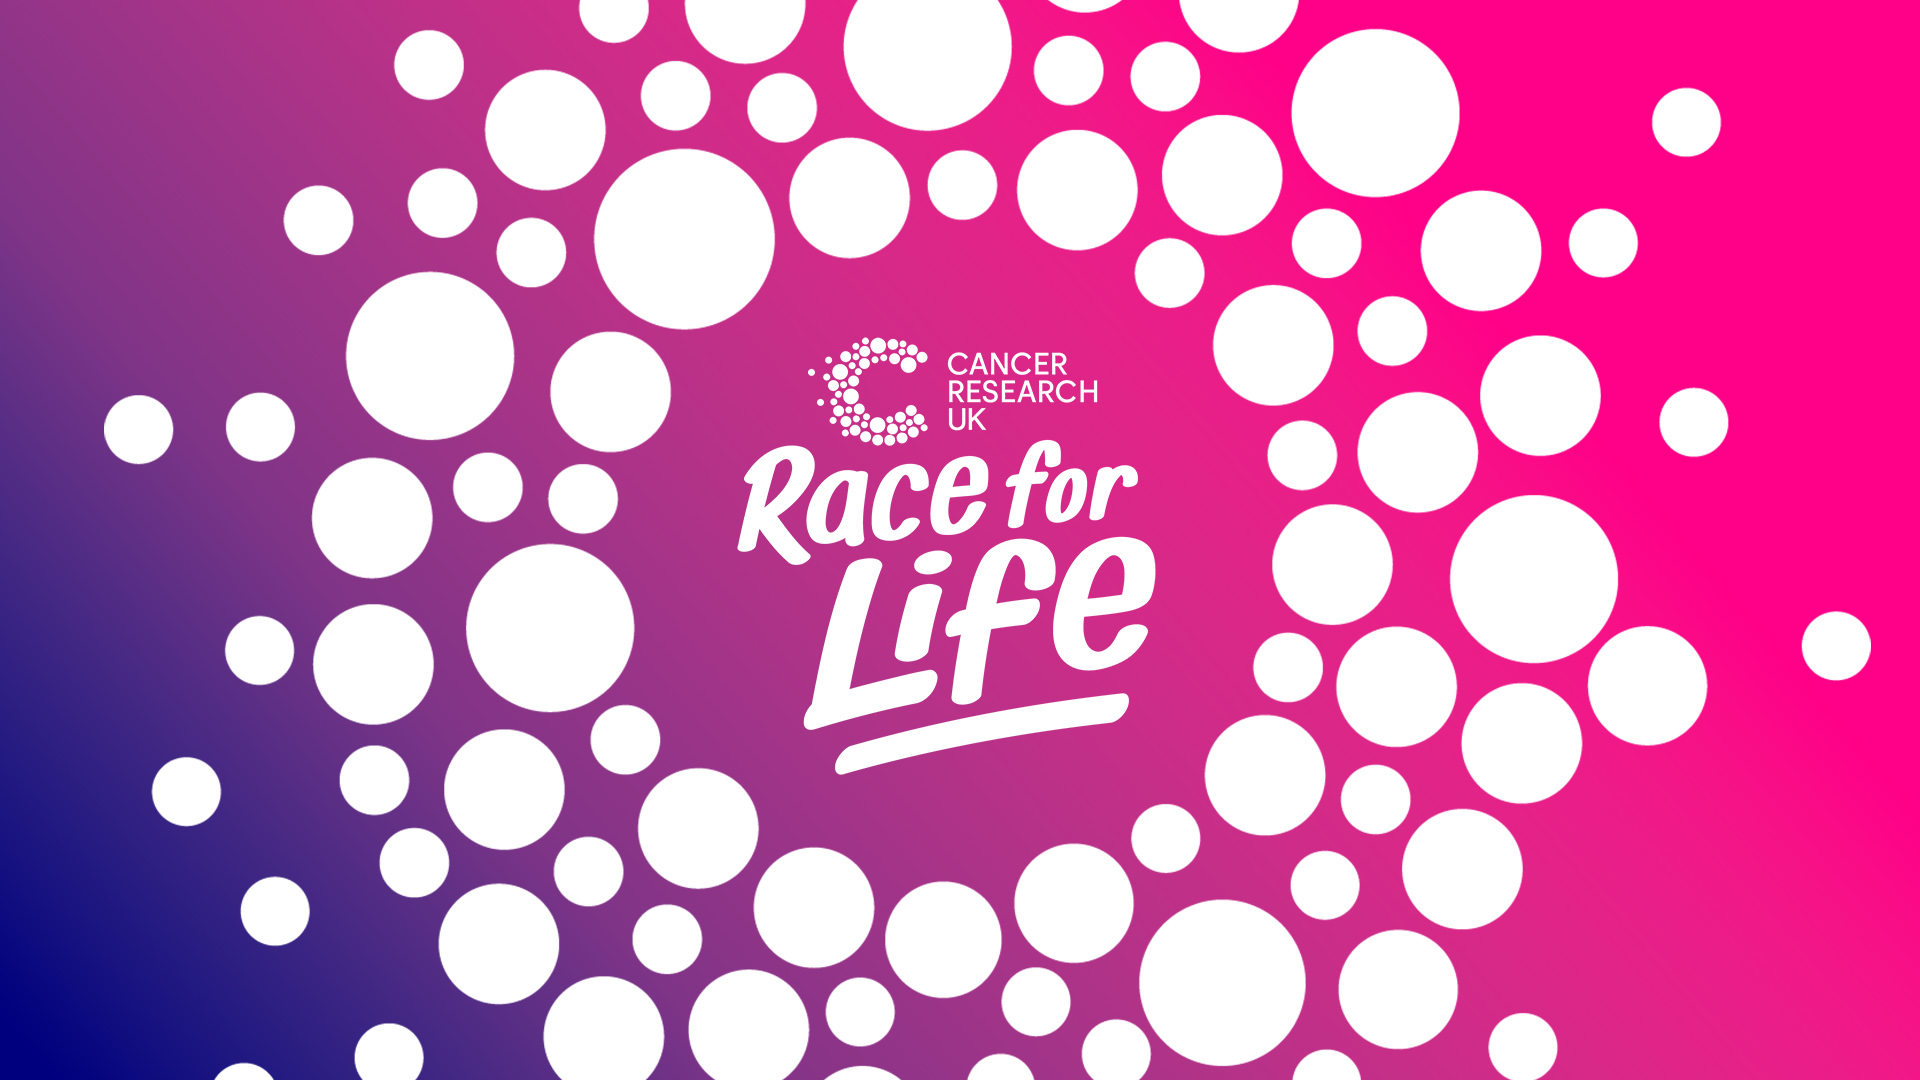 Pink and purple gradient with white dots and Race for Life logo on top